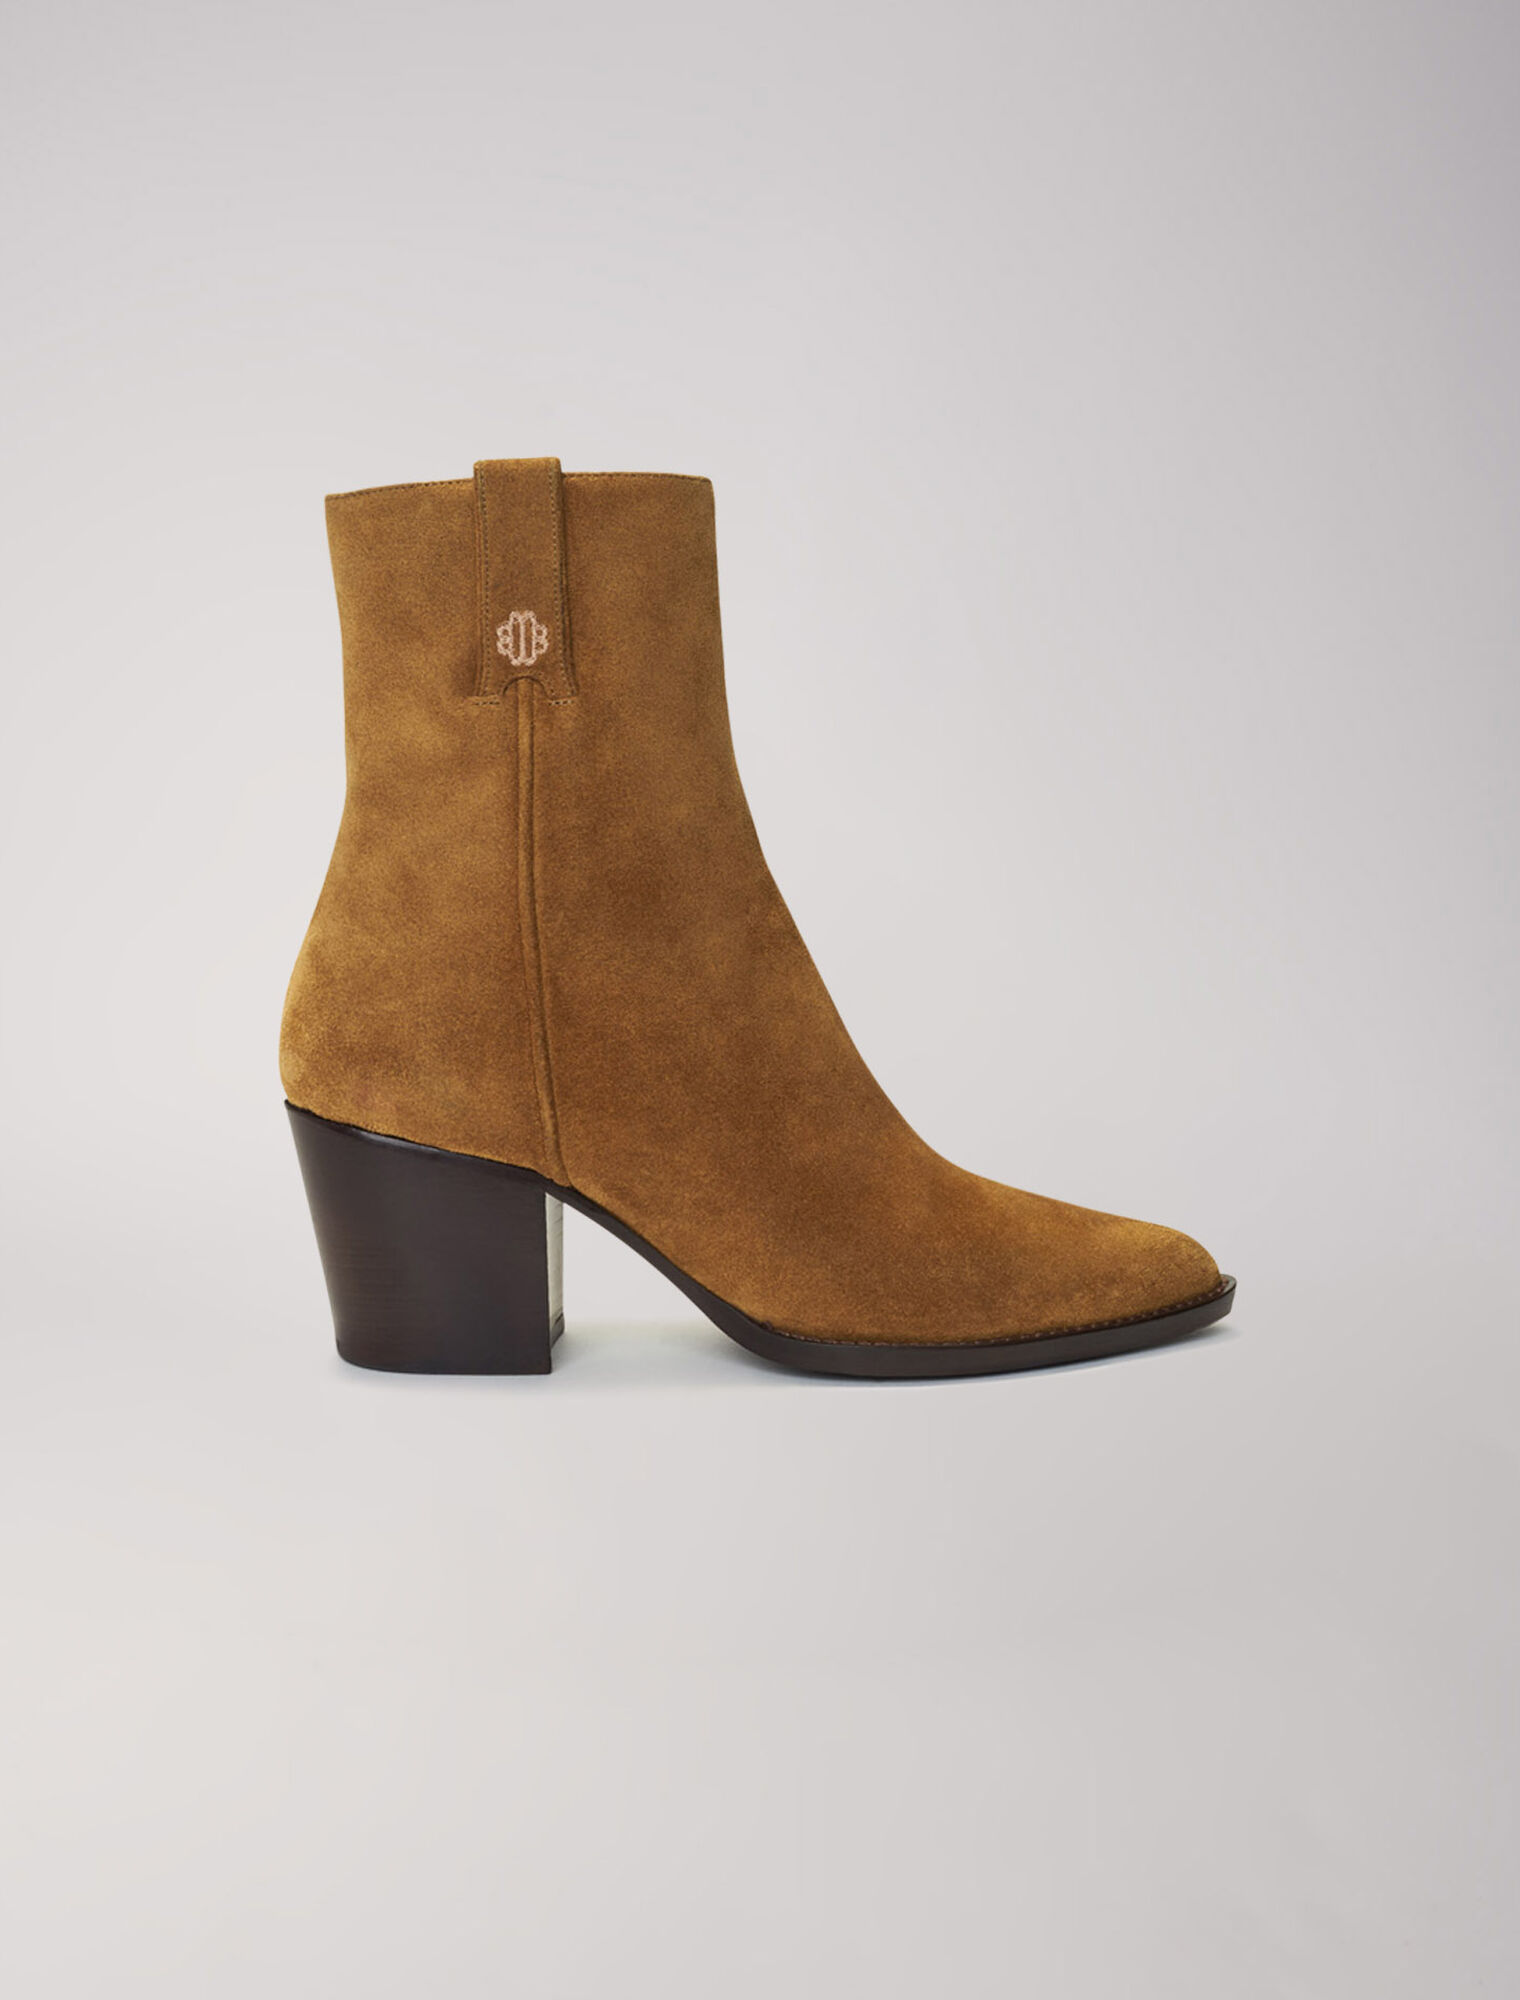 Camel suede boots